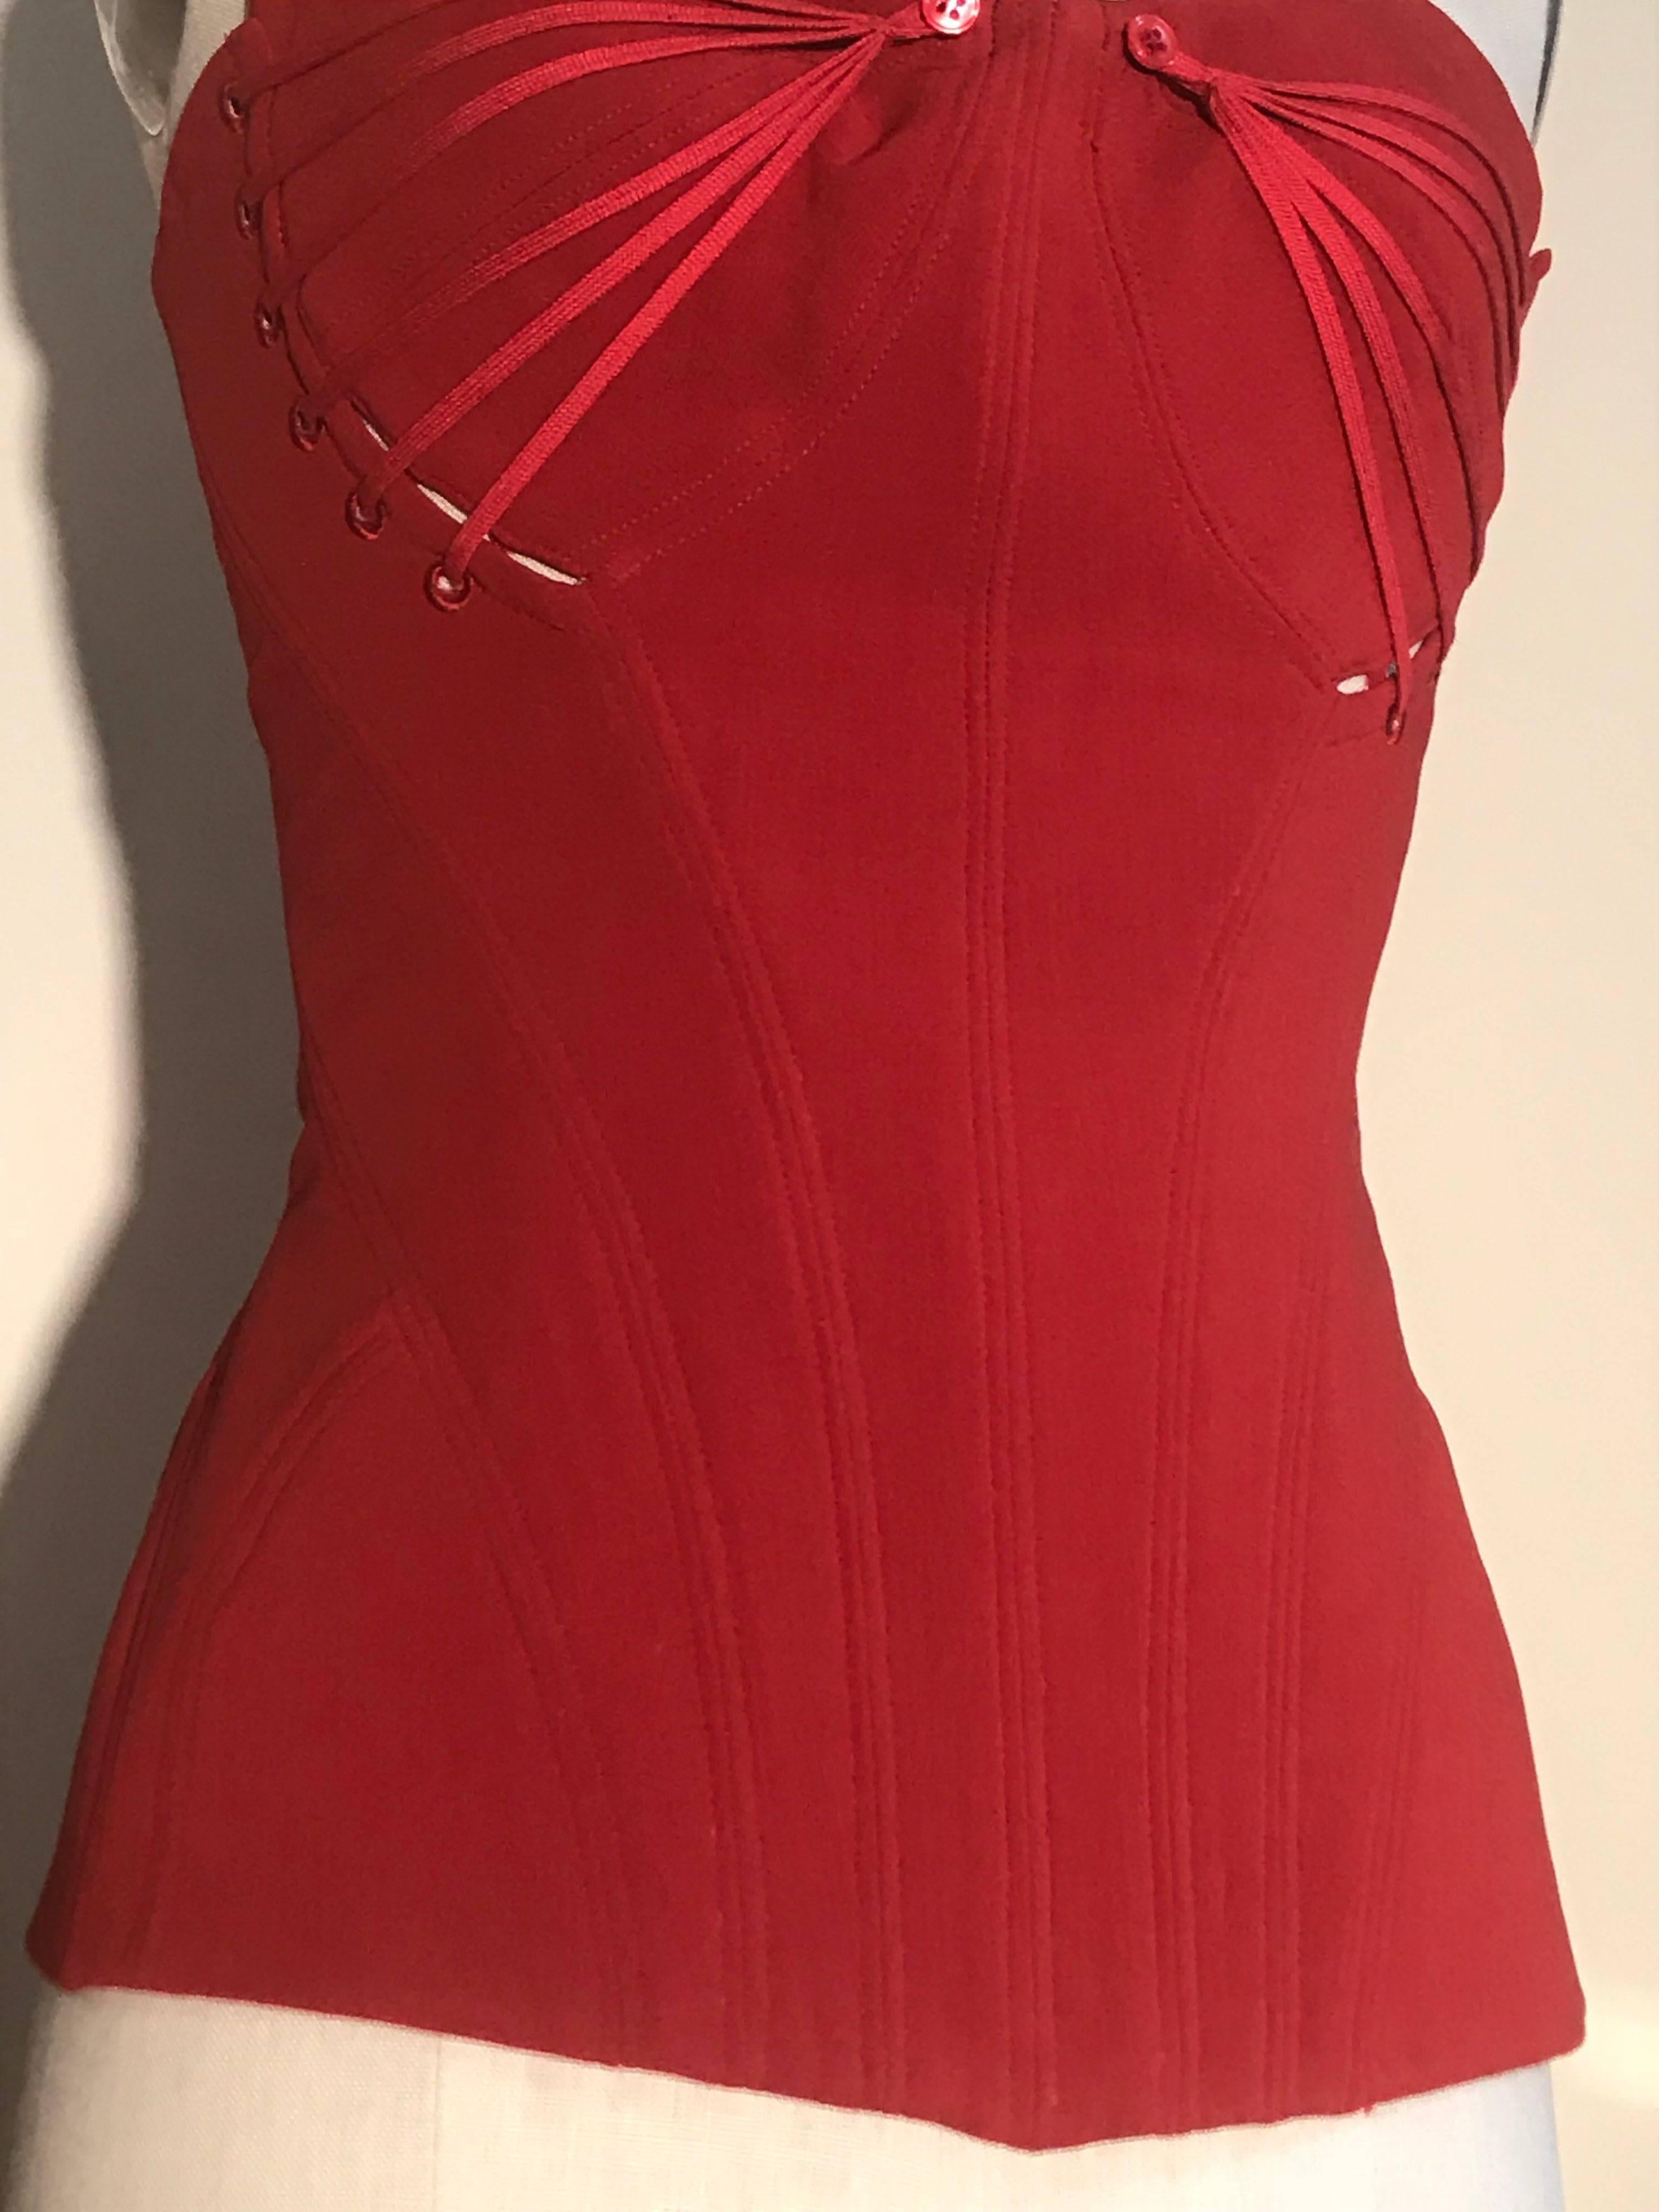 Alexander McQueen red corset top with elastic detailing at bust. Seam detailing and boning at interior. Zips at back and then laces up over the zipper. 

As seen in white on the Spring 2002 runway in look 17.

59% wool, 28% rayon, 8% polyamide, 5%